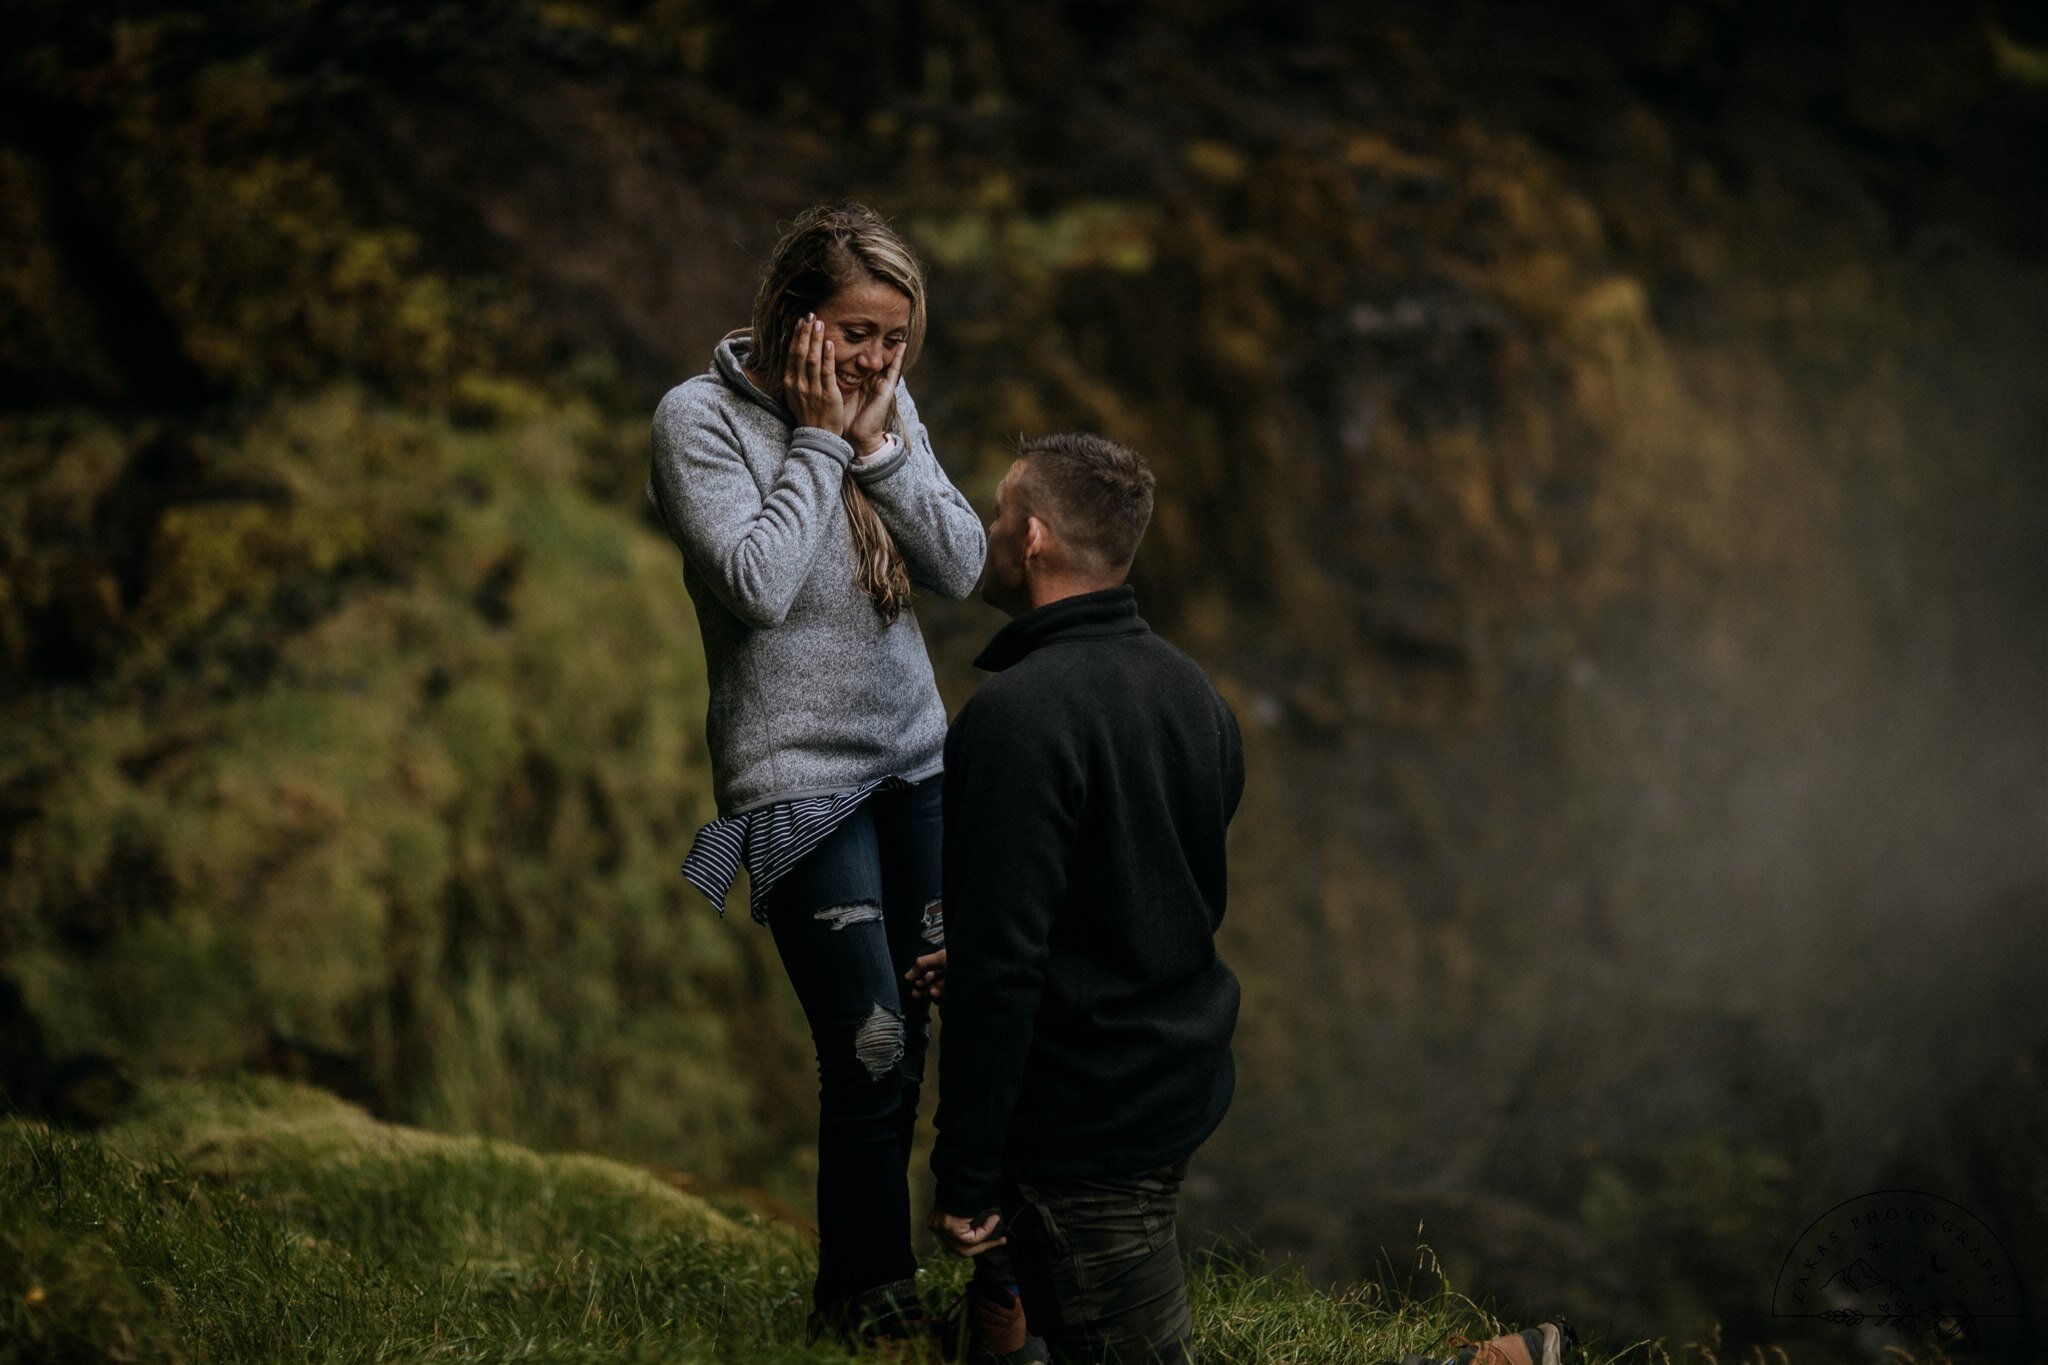 iceland proposal at Kvernufoss | best locations to propose in iceland | zakas photo